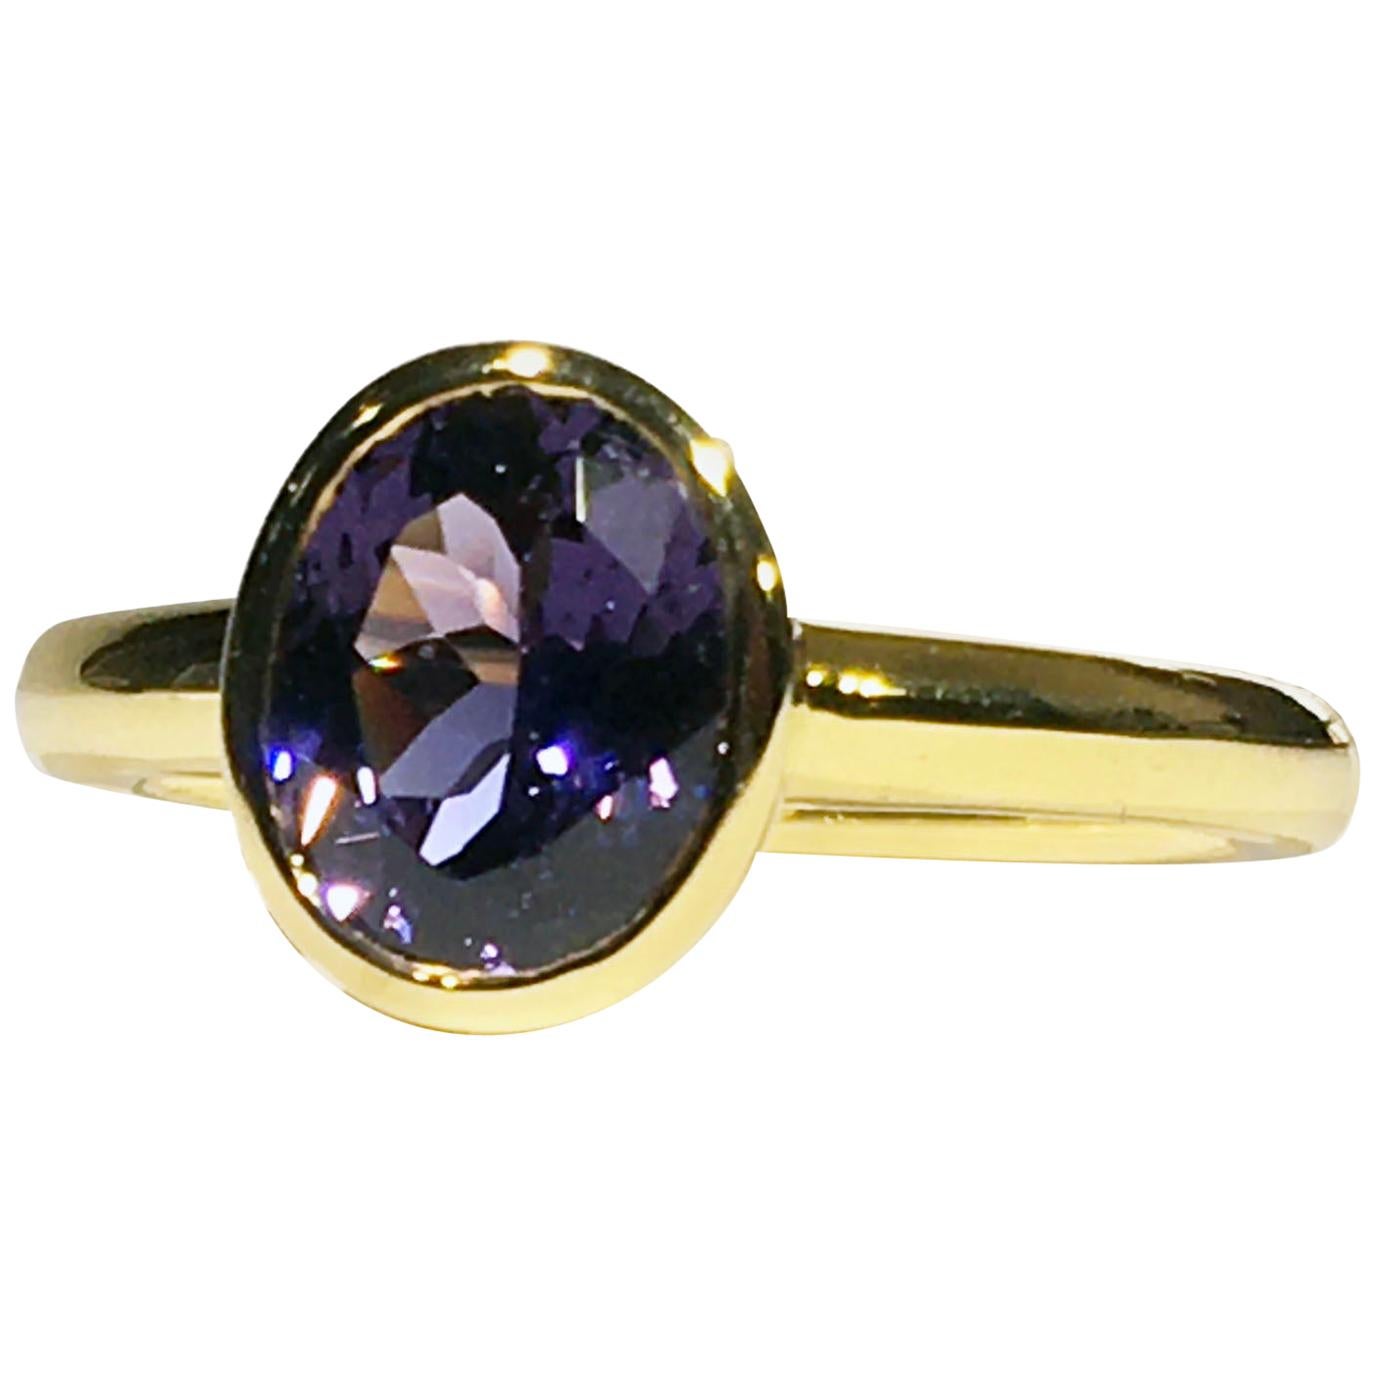 A Purple Spinel Ring set in 14kt Gold